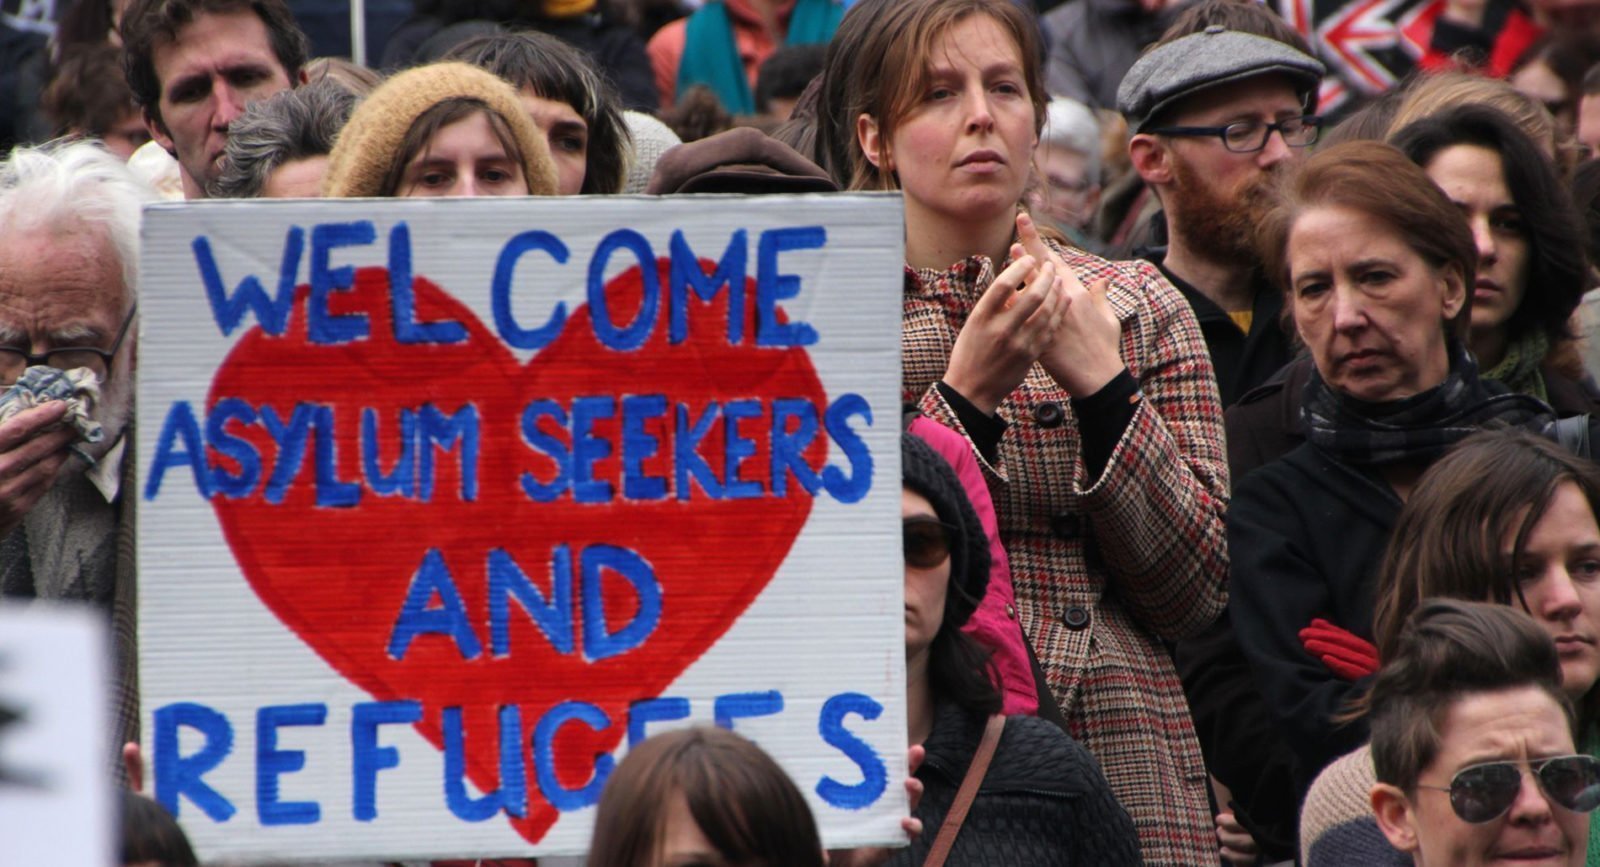 A protester holds a sign reading 'Welcome asylum seekers and refugees'